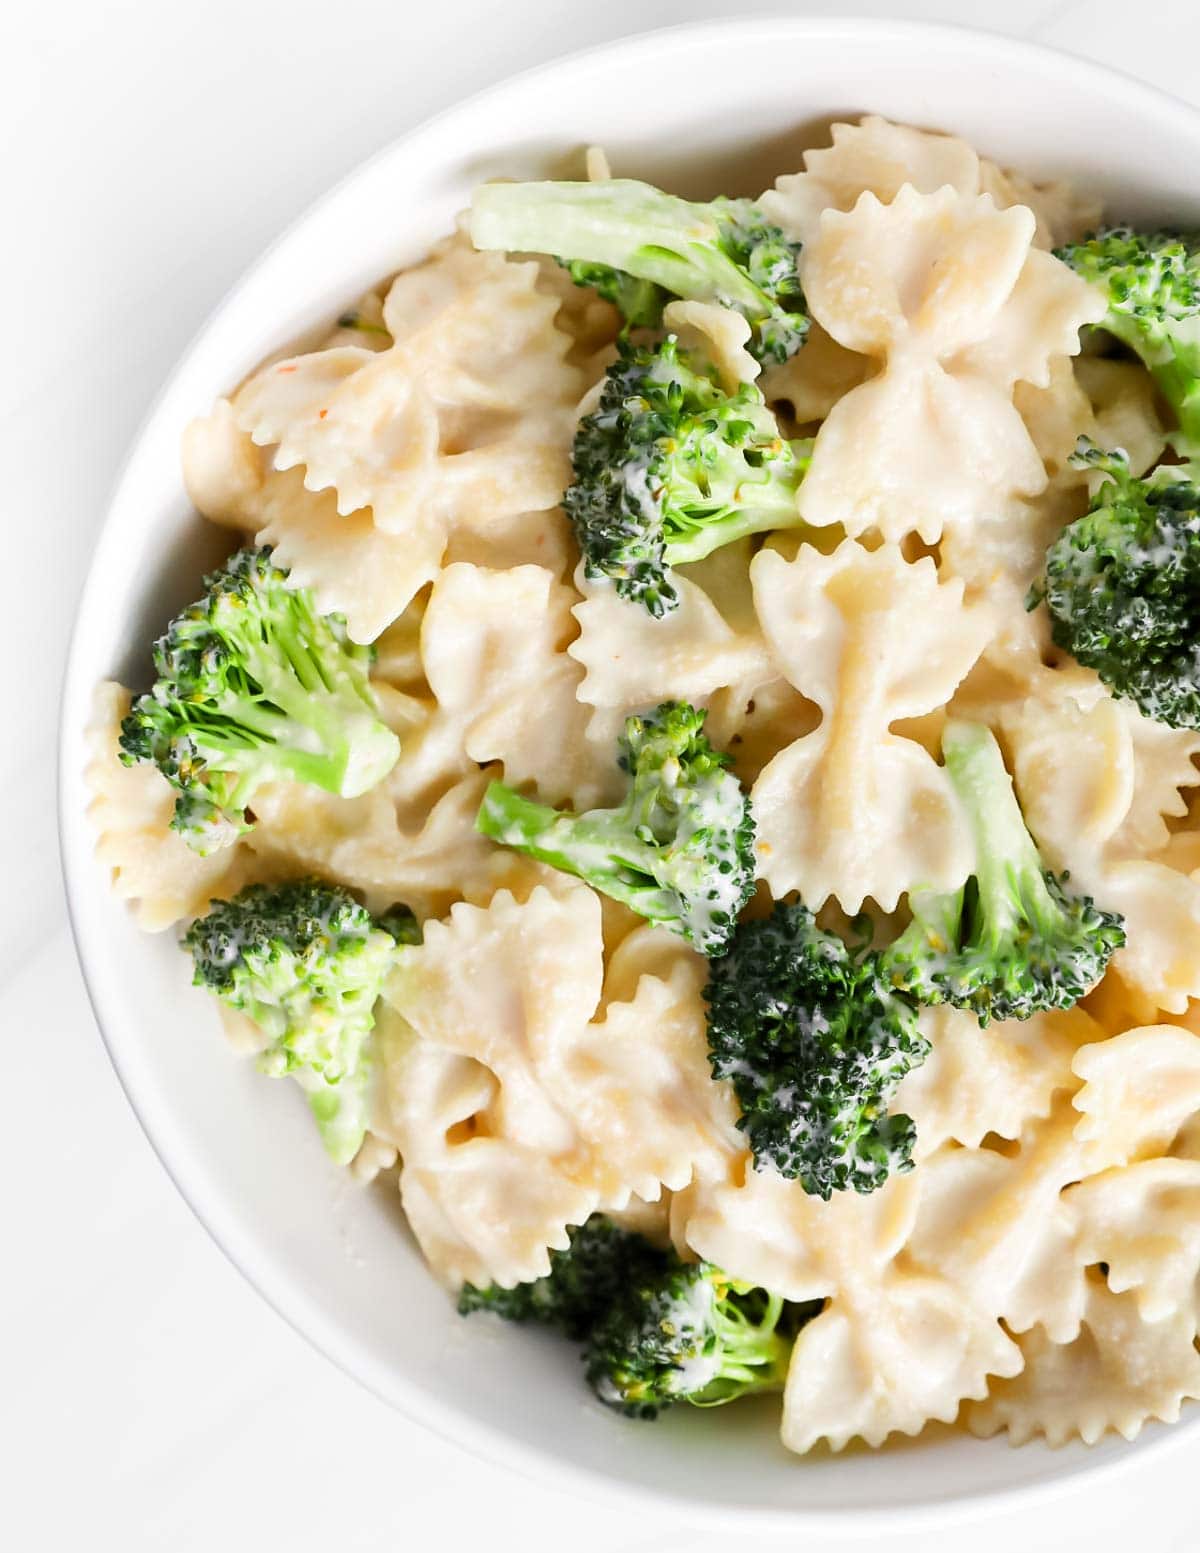 A close up picture of pasta in a white sauce with broccoli mixed in.